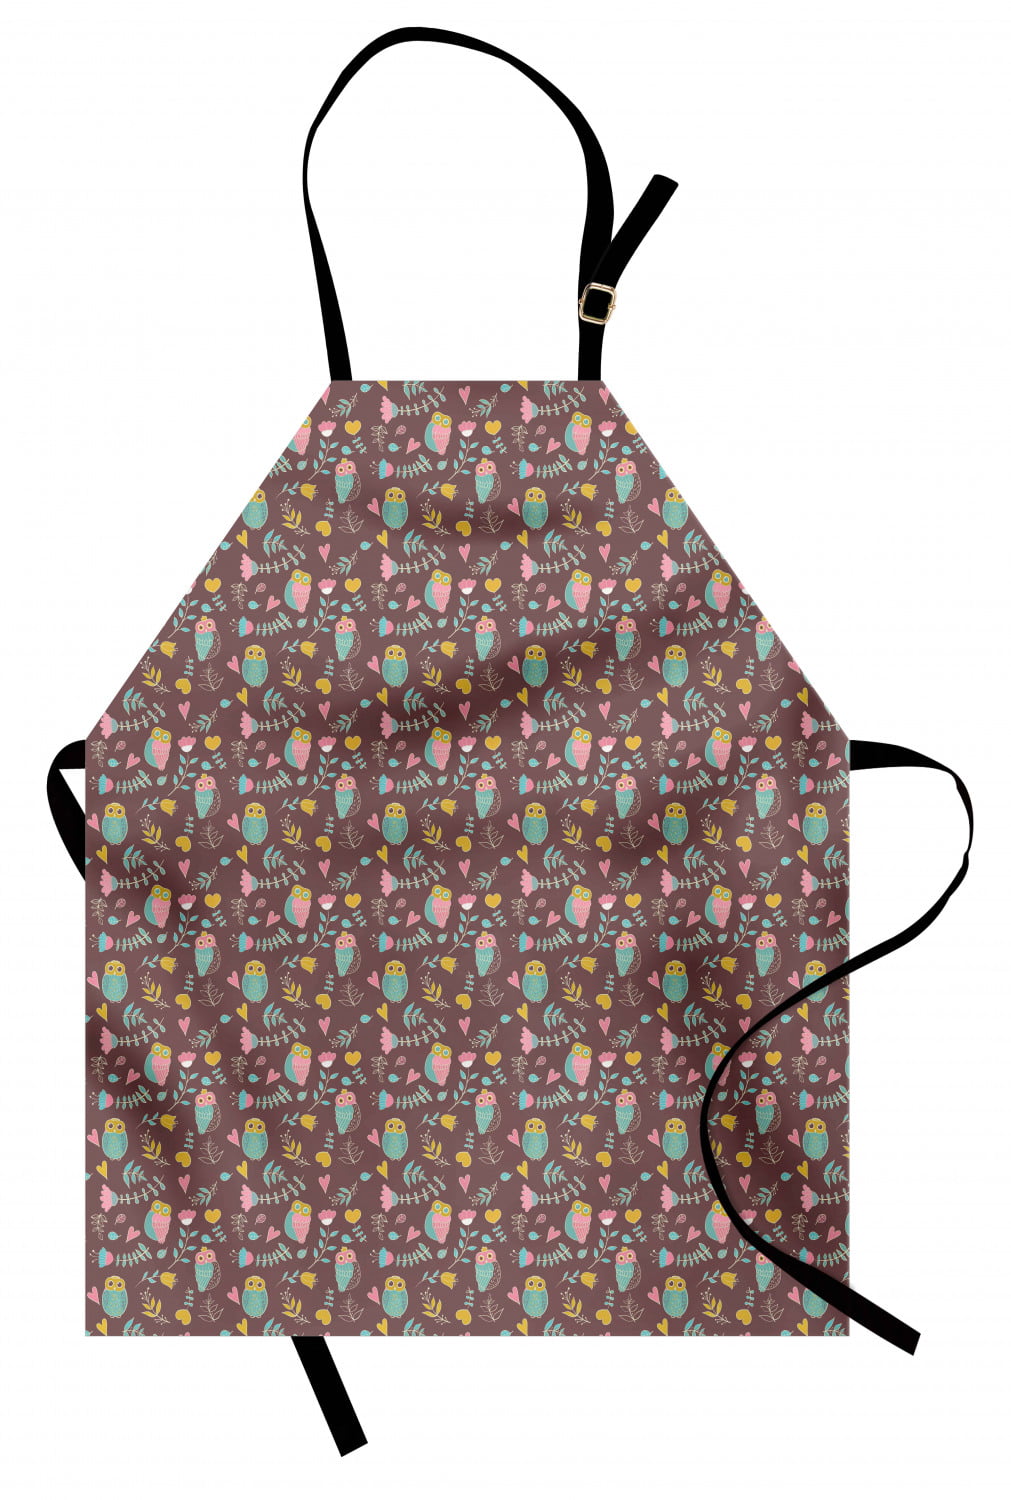 Details about   Standard Size Apron Bib with Adjustable Neck for Gardening Cooking Ambesonne 